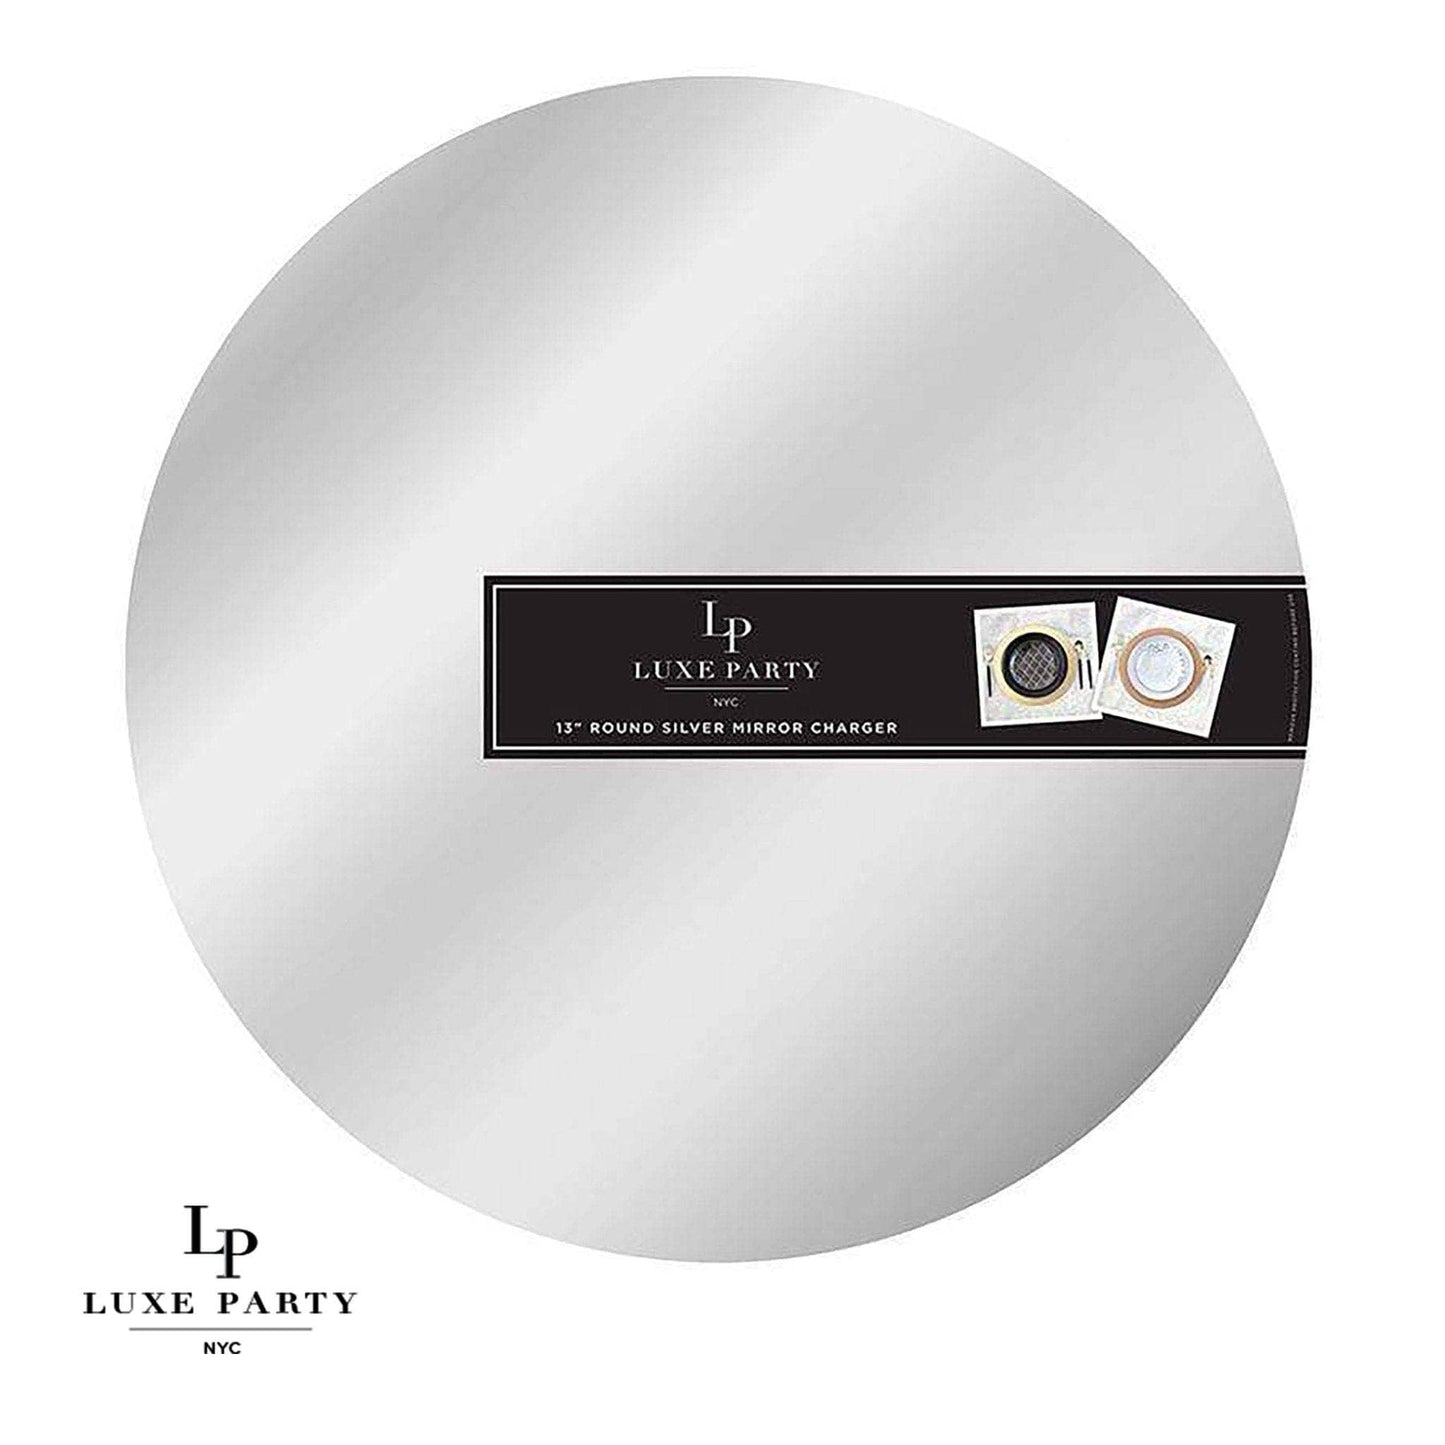 Luxe Party 13" Round Light Weight Mirror Charger Plate: Silver